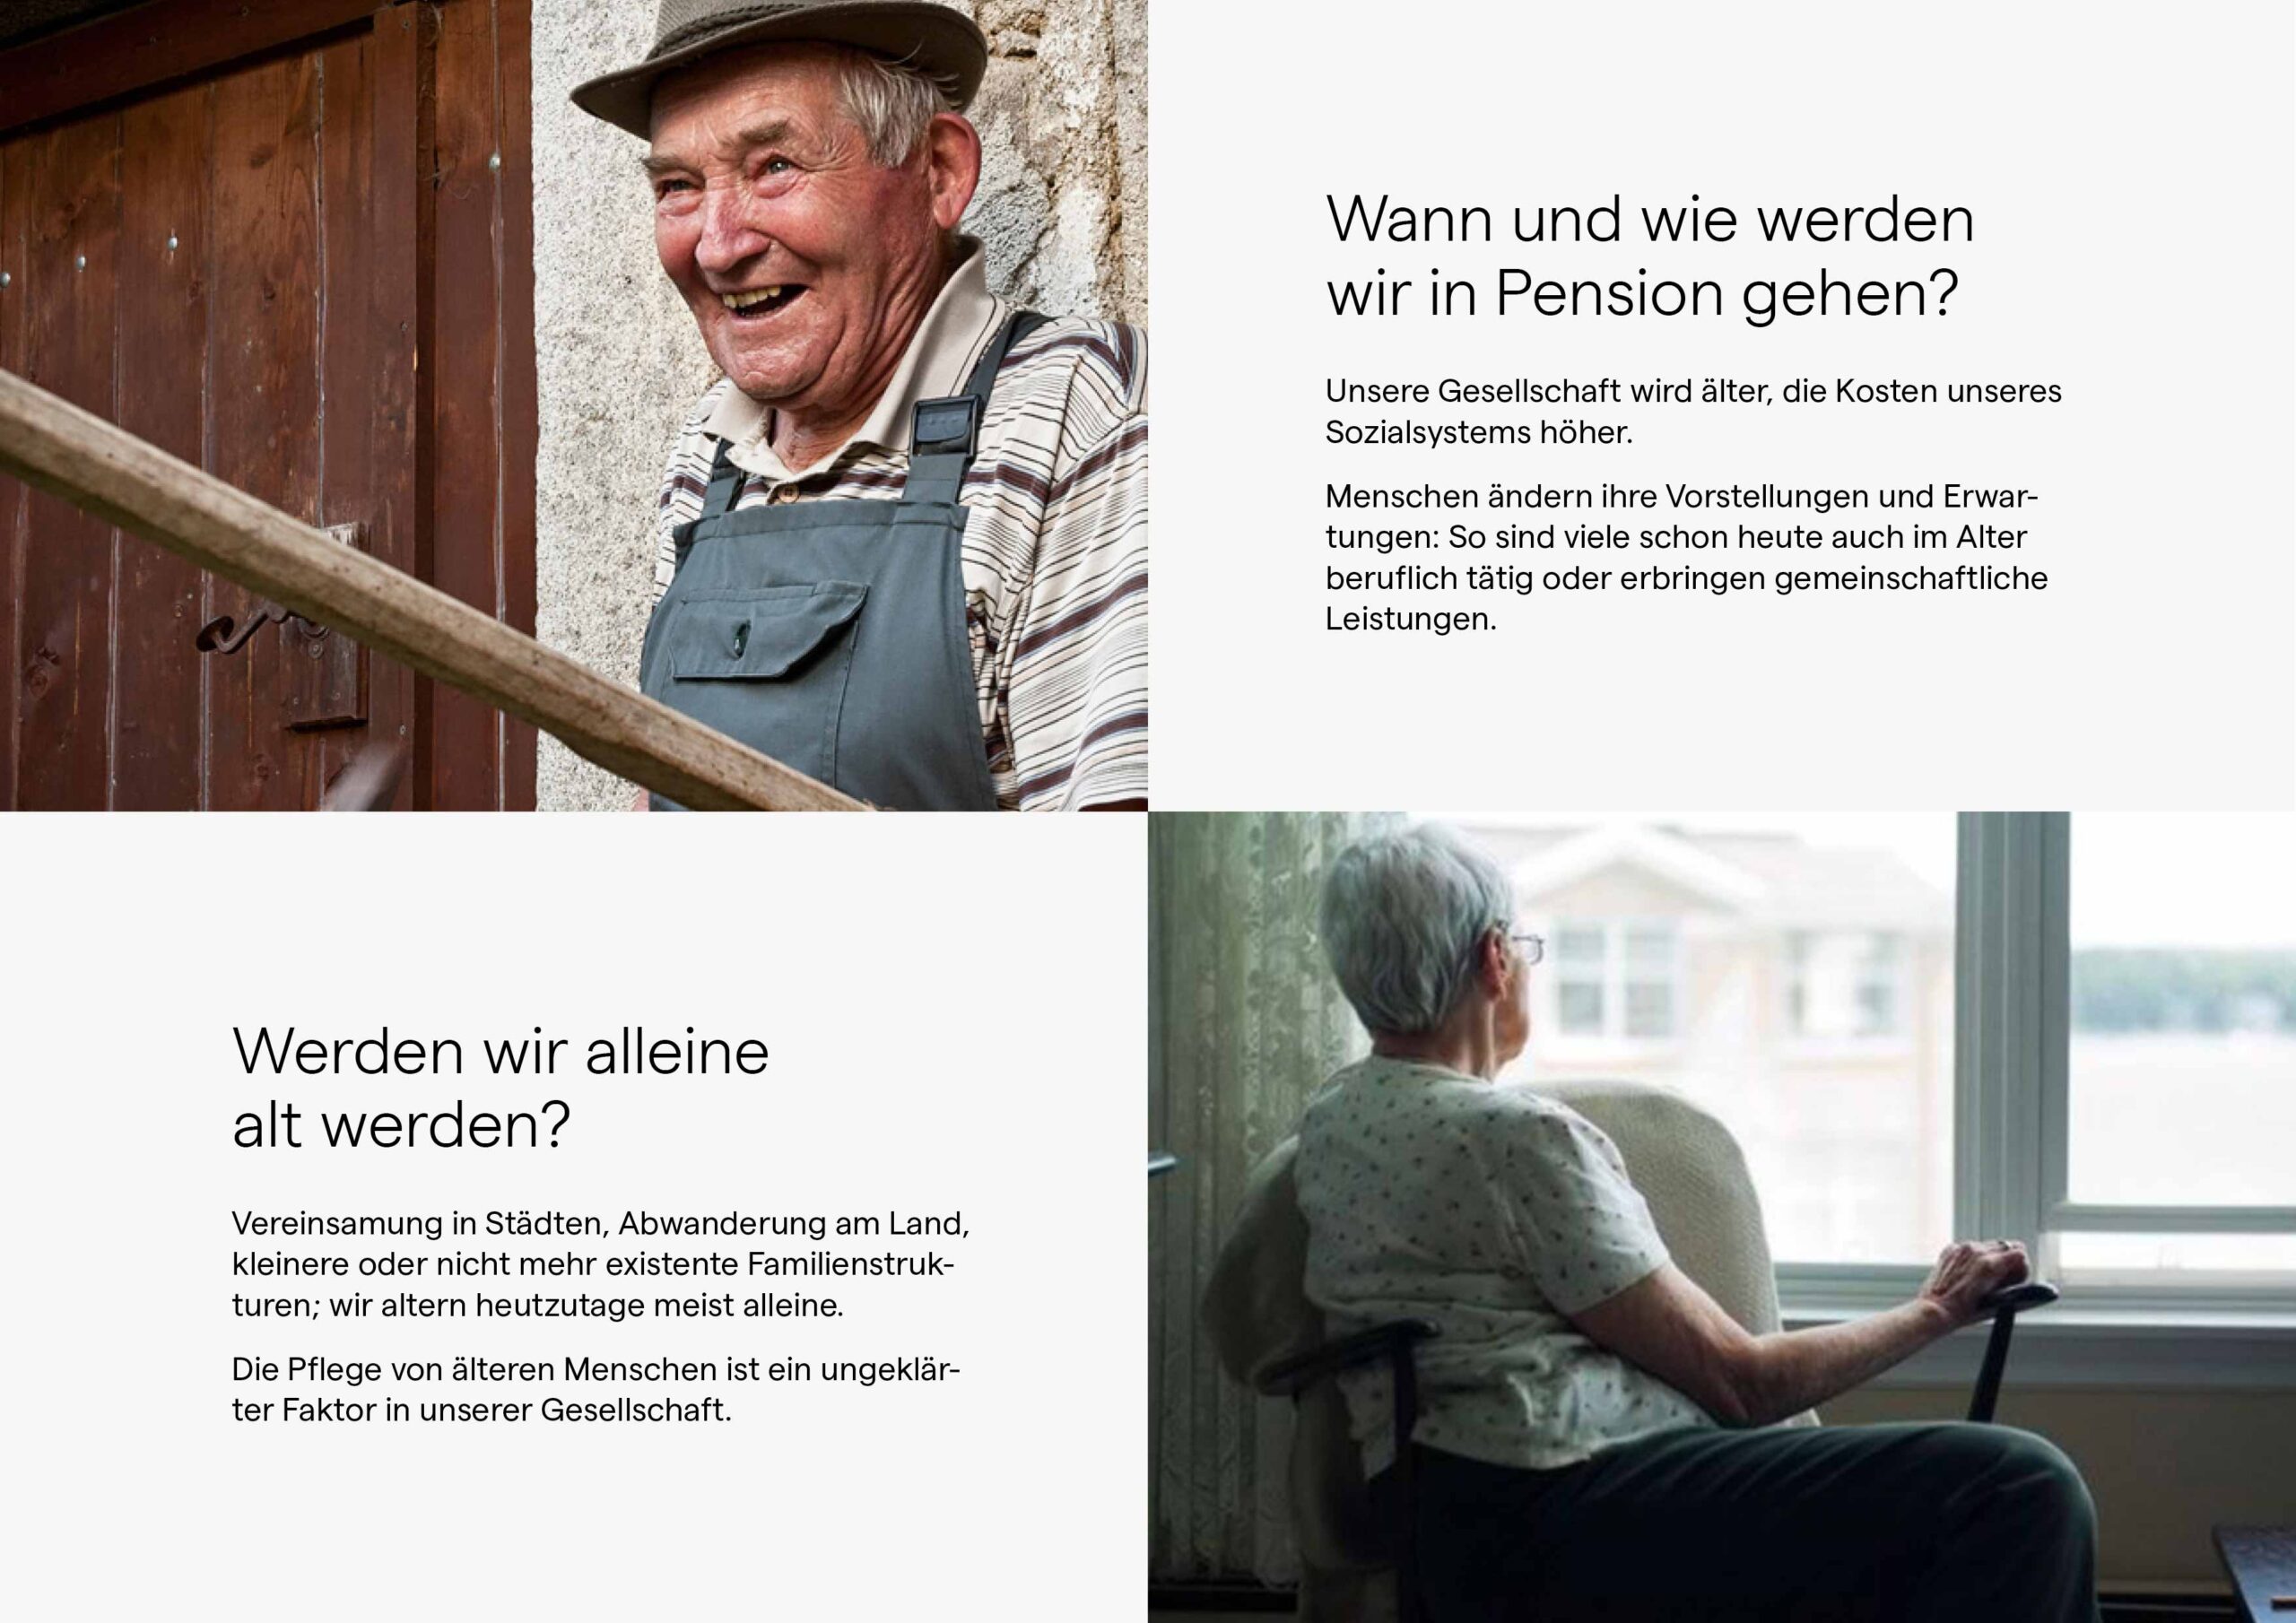 This image shows two global trends: "When and how will we retire?" and "Will we grow old alone?"